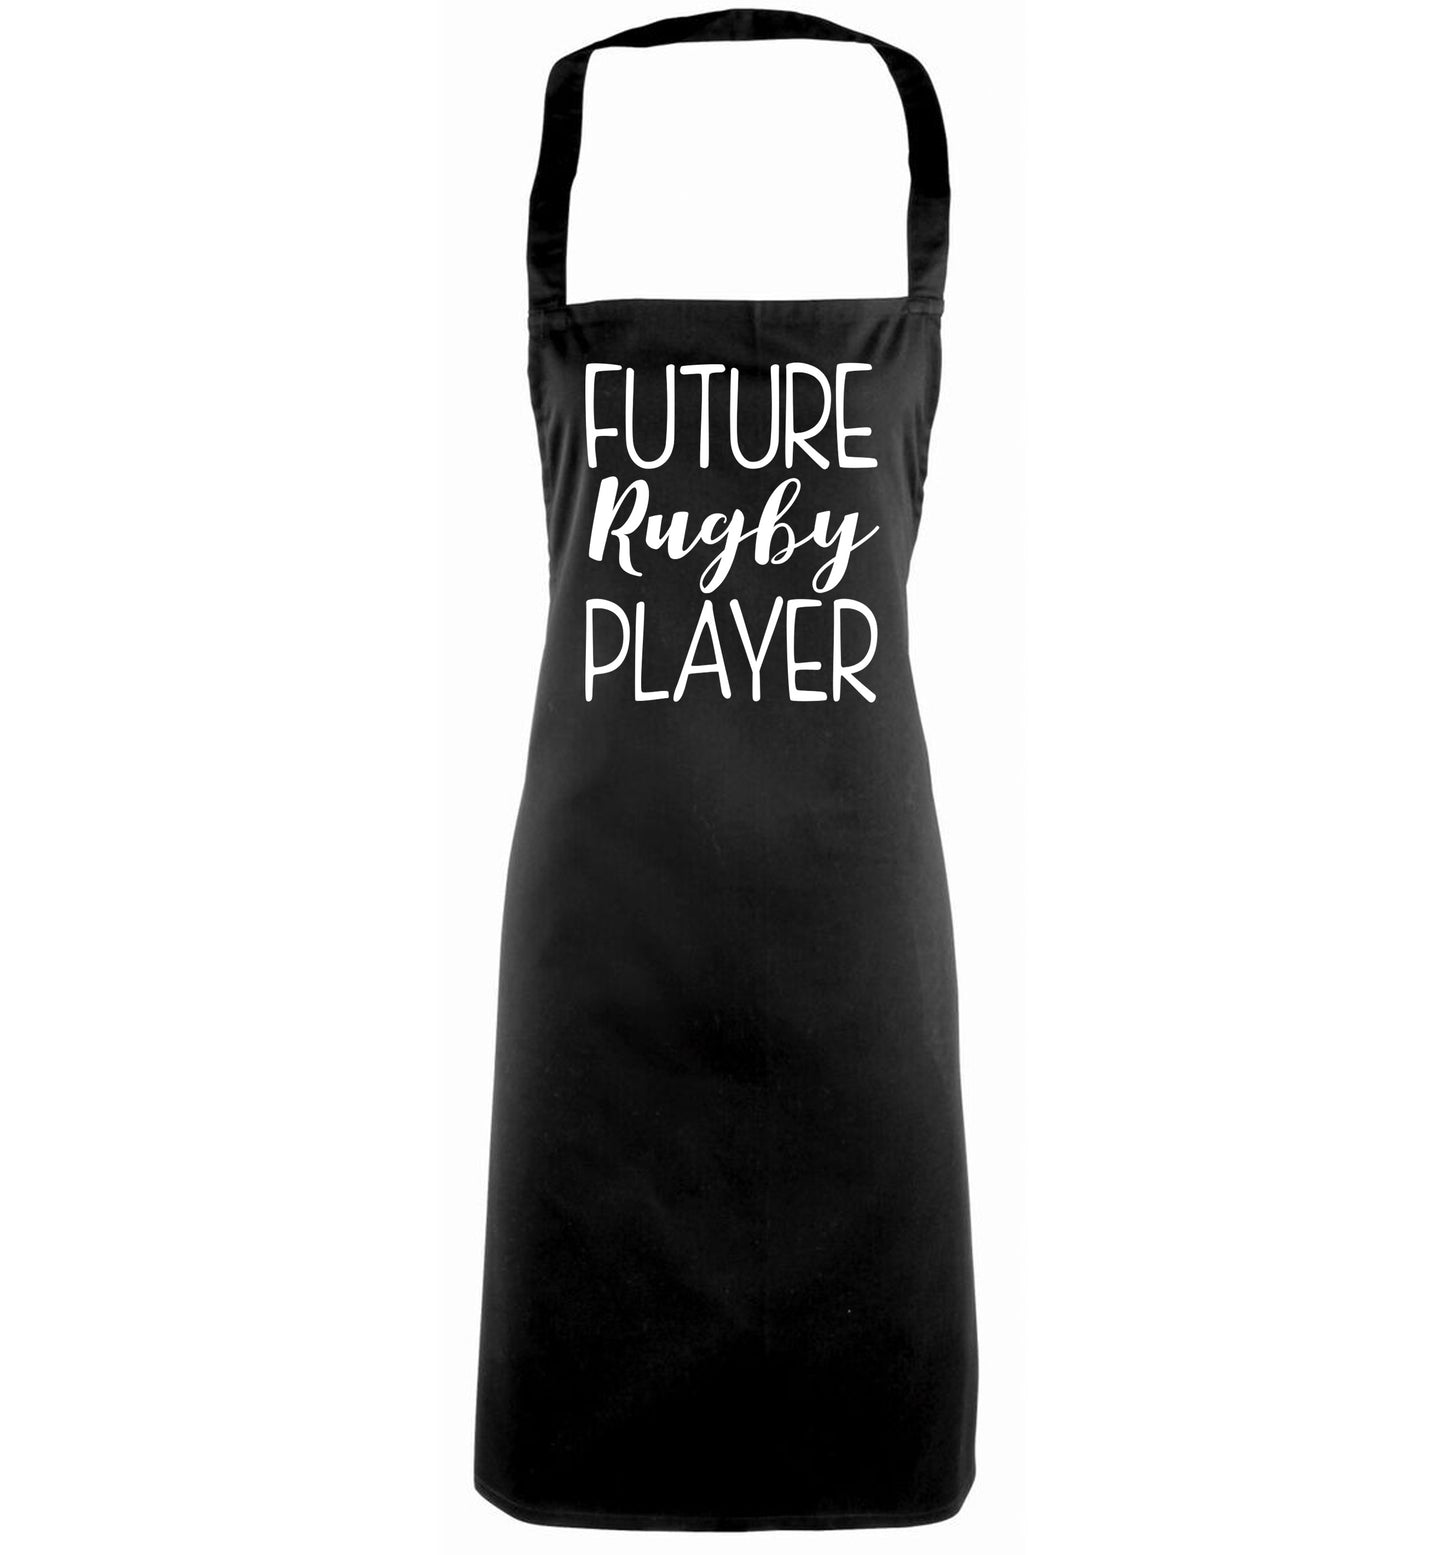 Future rugby player black apron